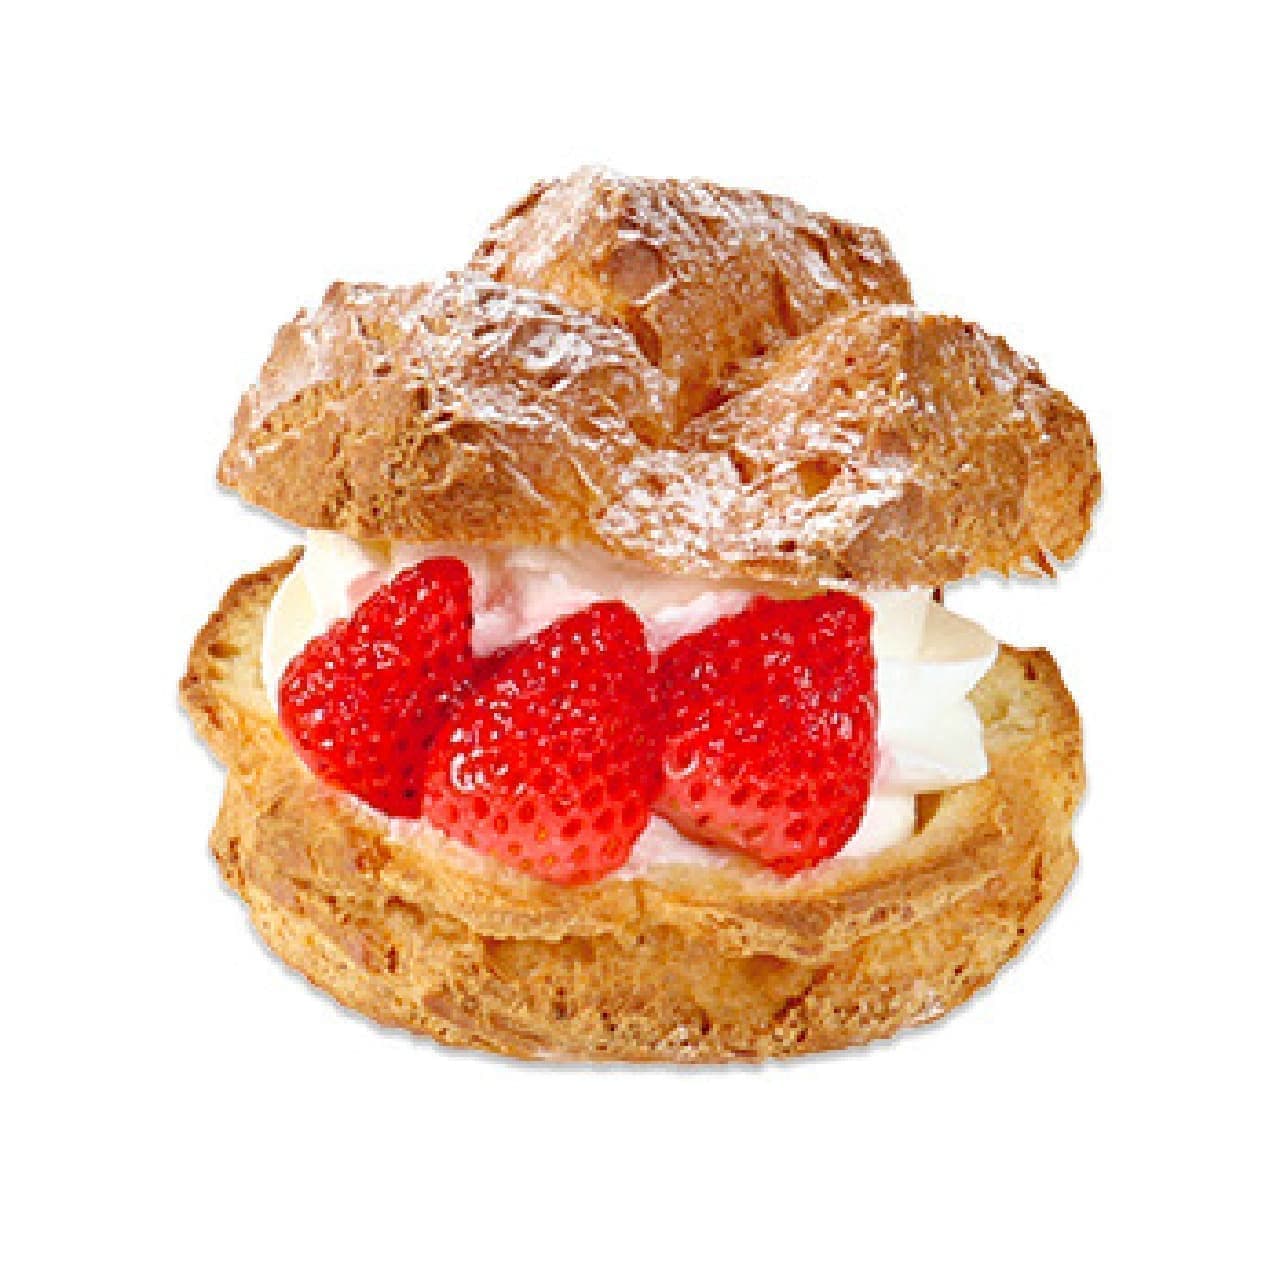 Oven-baked Double Cream Puff (Japanese Strawberry)